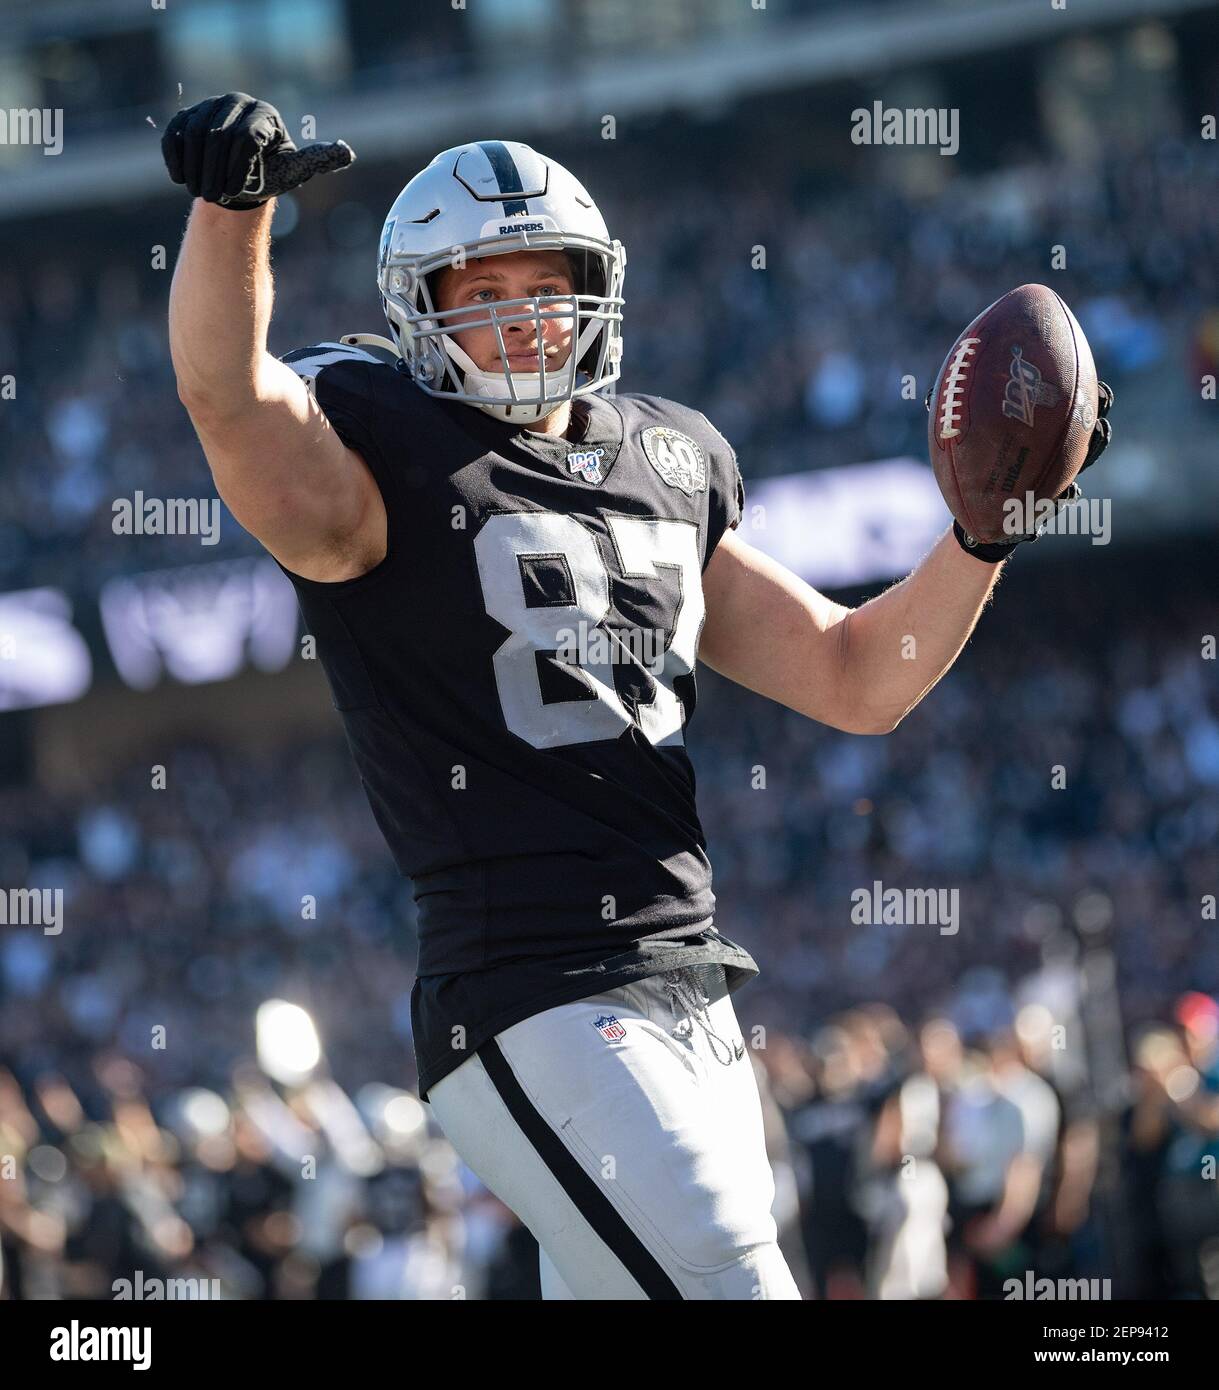 November 17, 2019: Oakland Raiders tight end Foster Moreau (87) celebrates  his touchdown, during a NFL game between the Cincinnati Bengals and the  Oakland Raiders at the Oakland Coliseum in Oakland, California.